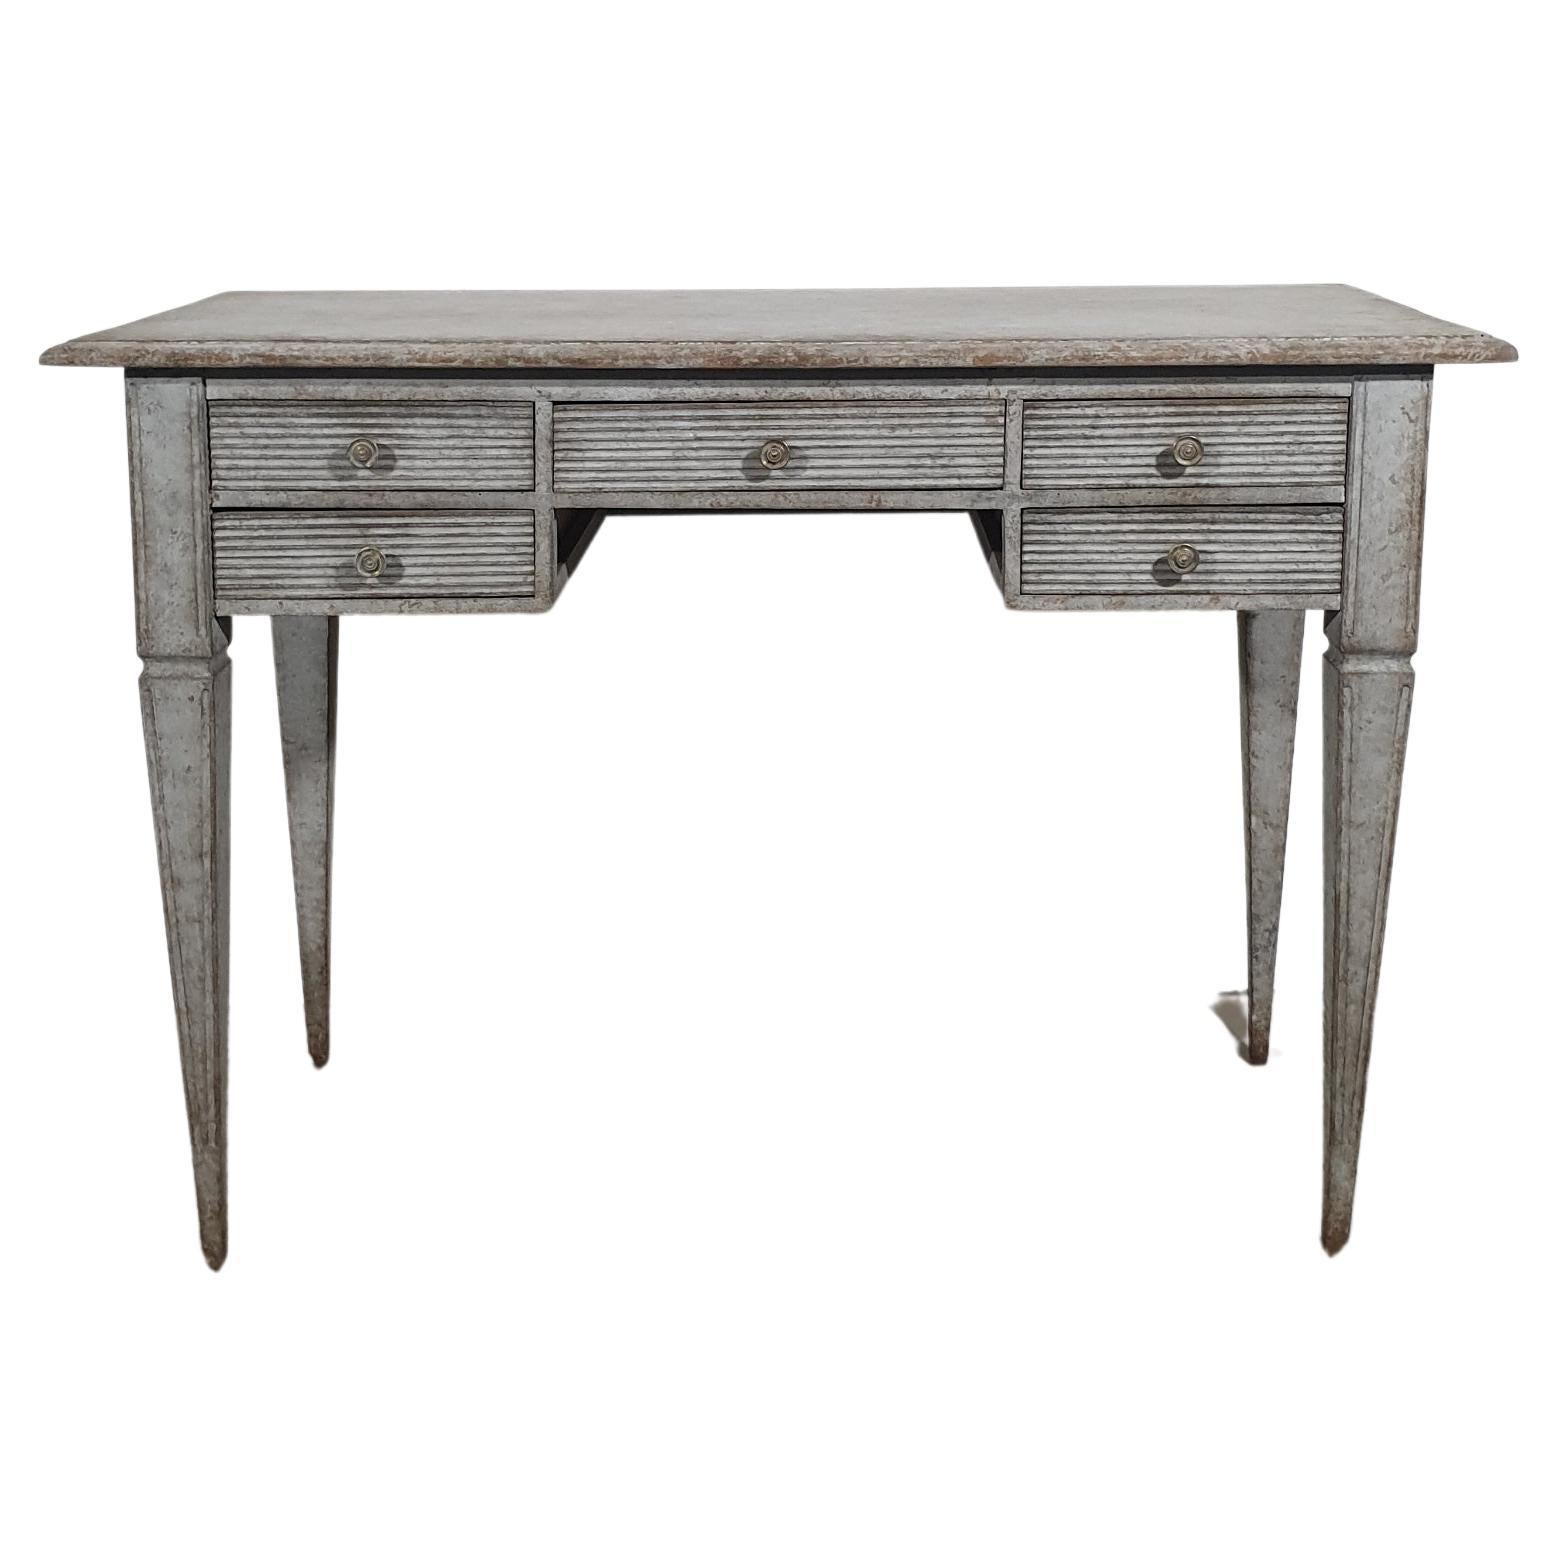 Gustavian Style 1870s Swedish Gray Painted Desk, Fluted Drawers and Tapered Legs For Sale